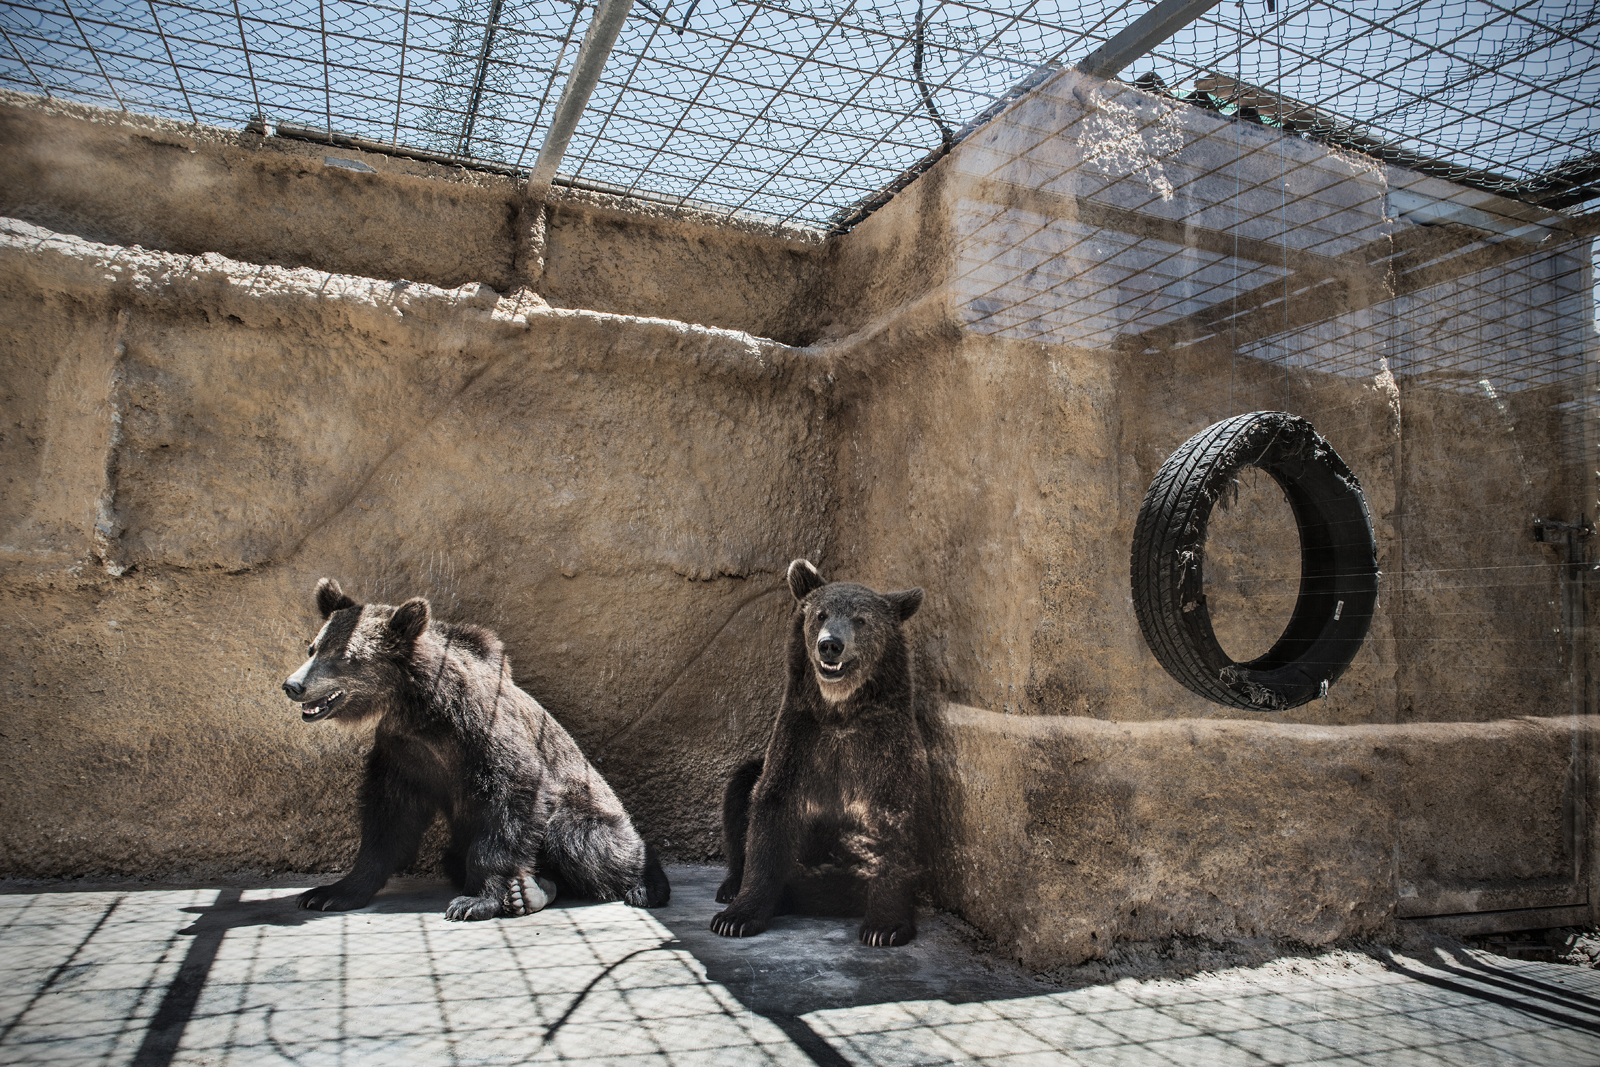 HOW WOULD IT BE POSSIBLE TO PHASE OUT ZOOS?